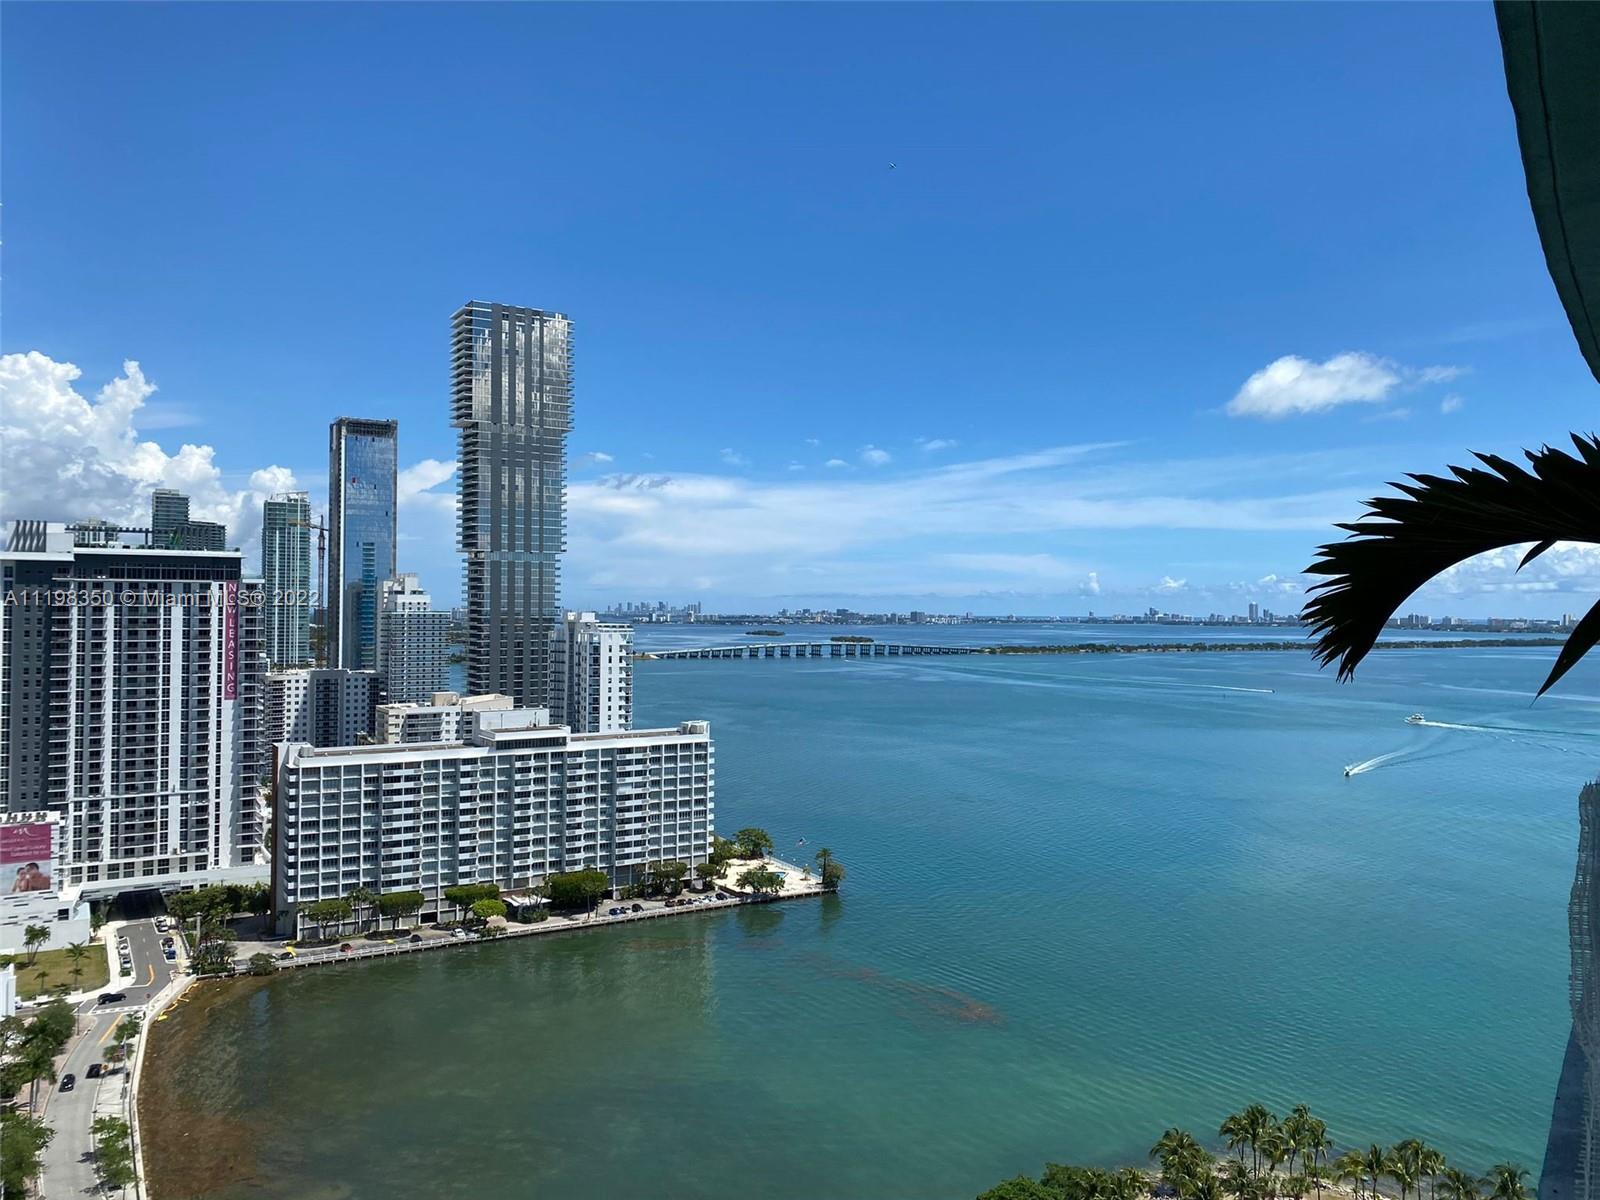 Spectacular and spacious 1 BR / 1 Bath unit, with breathtaking views overlooking Biscayne Bay and located in Edgewater, one of the most desirable areas of Miami. Unit offers high ceilings, open kitchen with stainless steel appliances; bright living room / dining room areas, and spacious balcony. The unit has beautiful wood flooring throughout and comes with one assigned parking space. Easy to show and Will go fast!